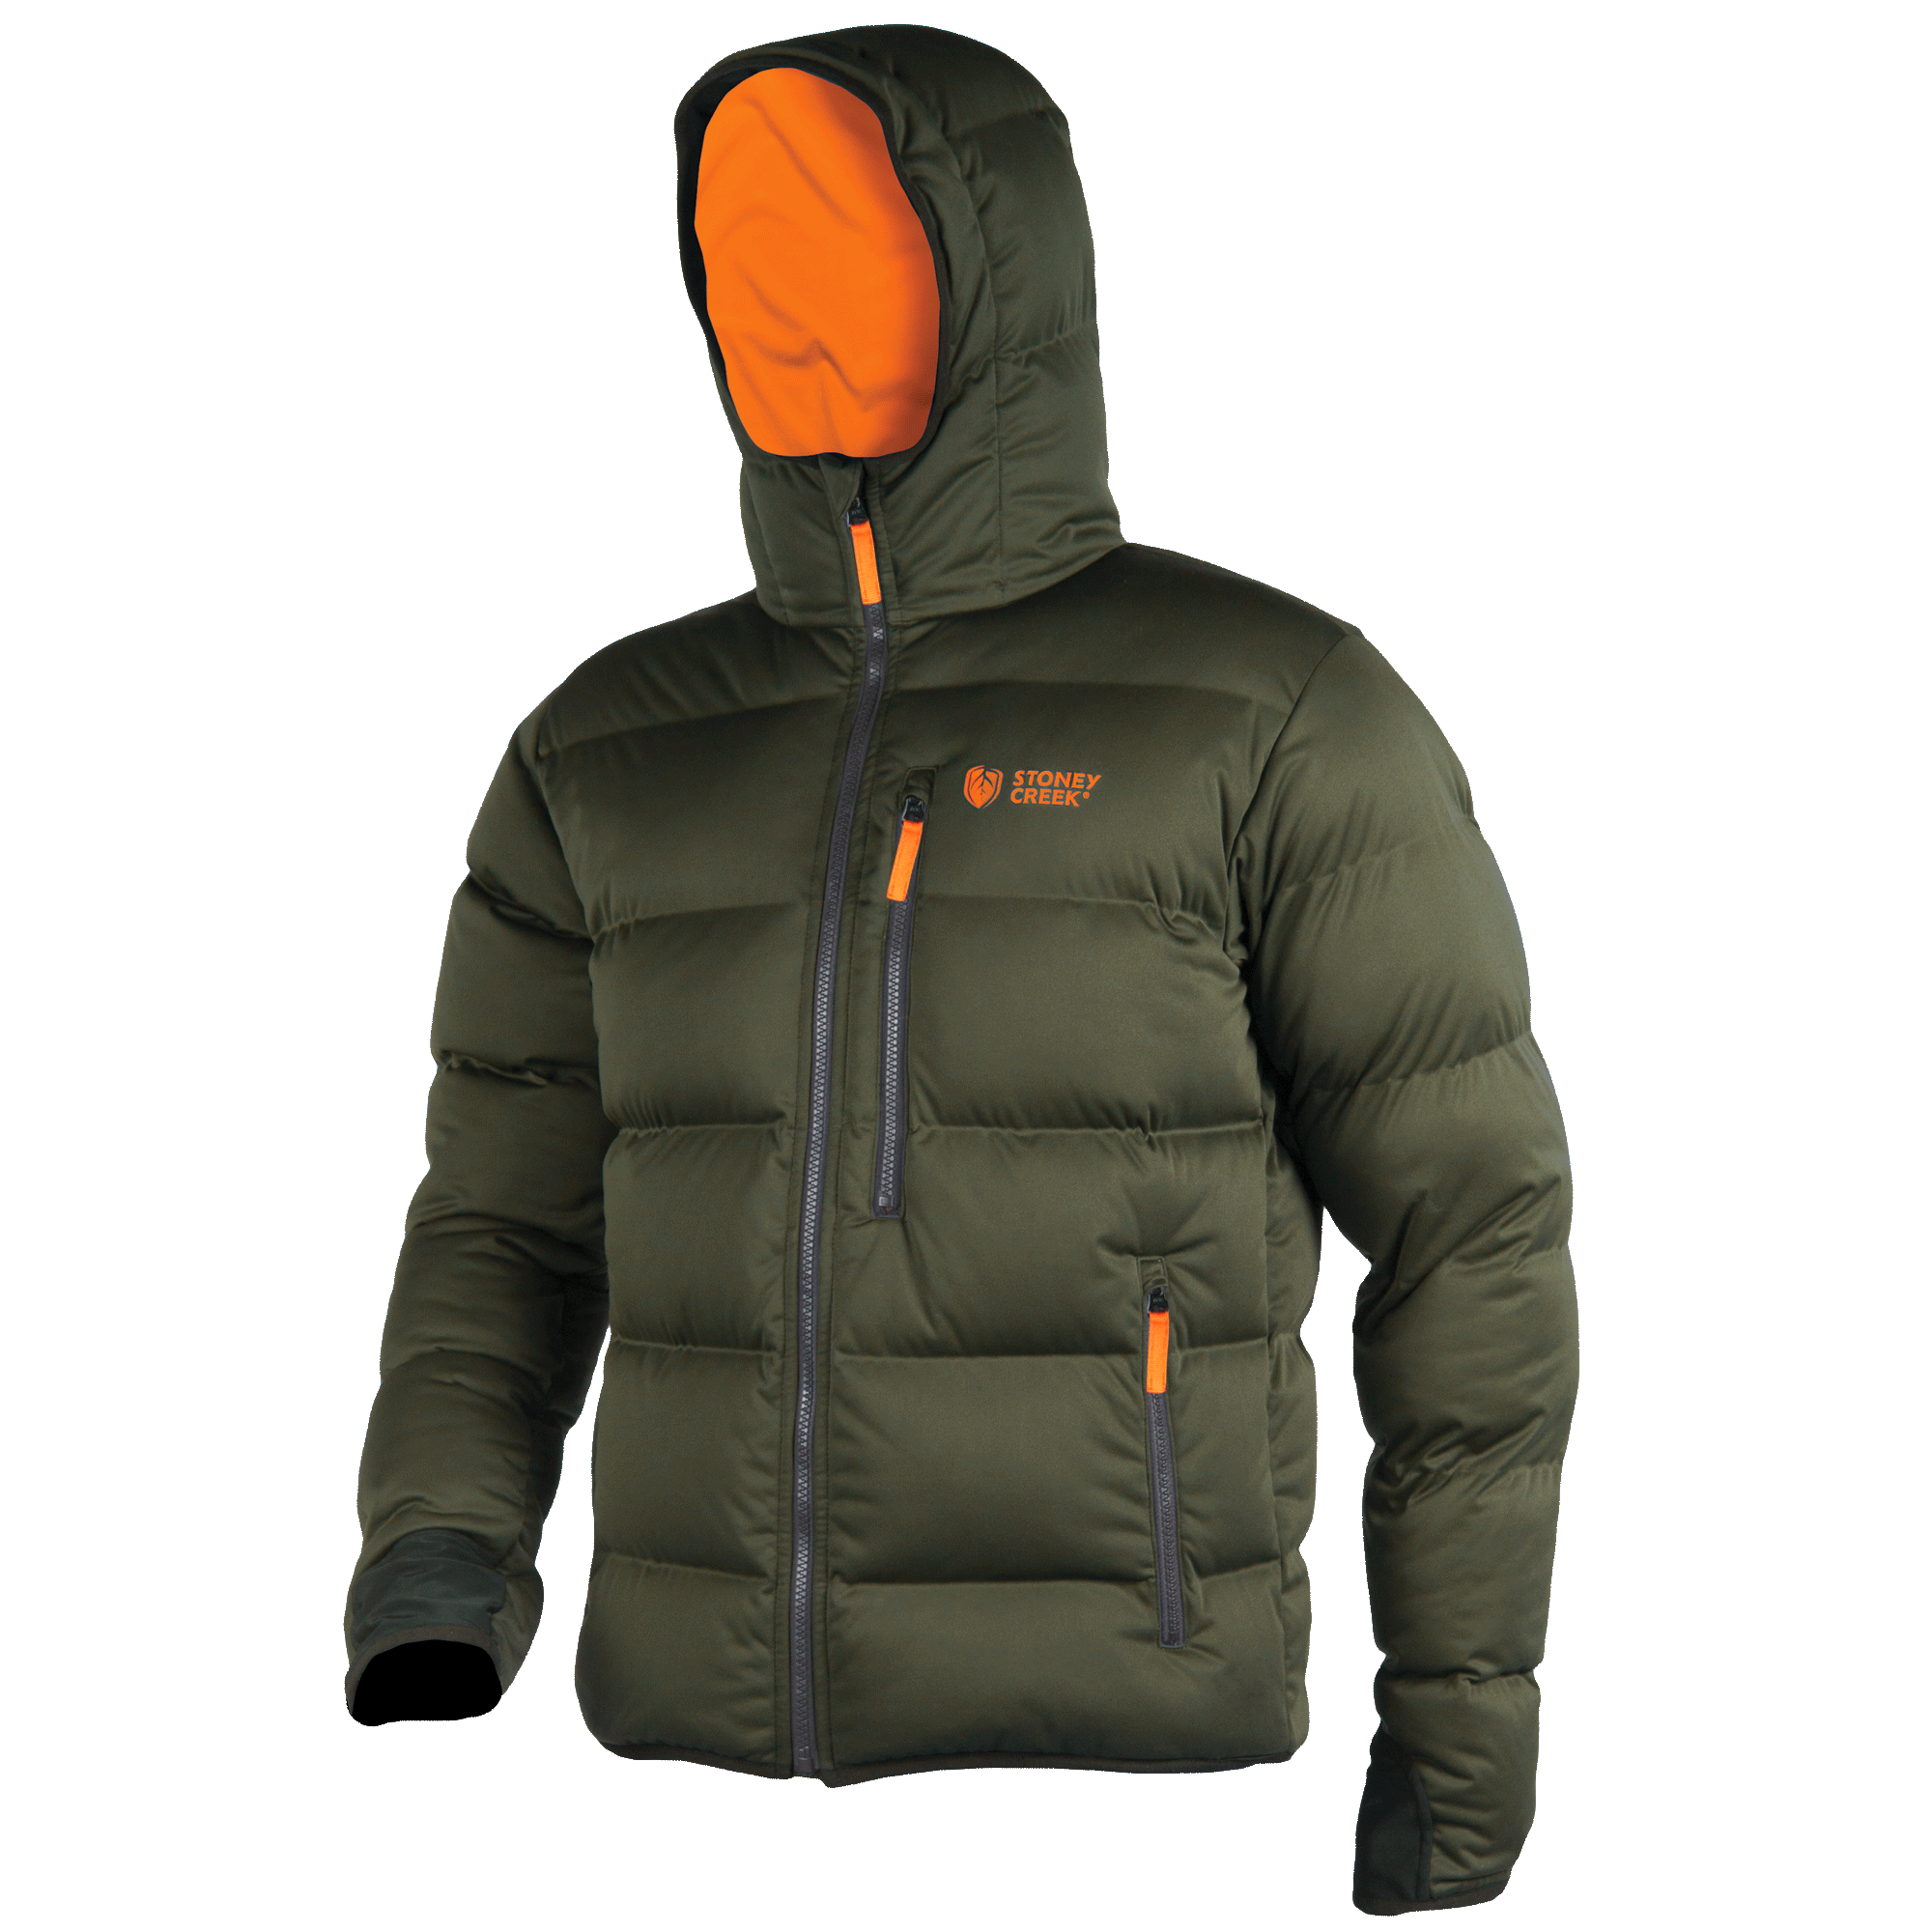 Stoney Creek Thermolite Jacket - XL / BAYLEAF - Mansfield Hunting & Fishing - Products to prepare for Corona Virus